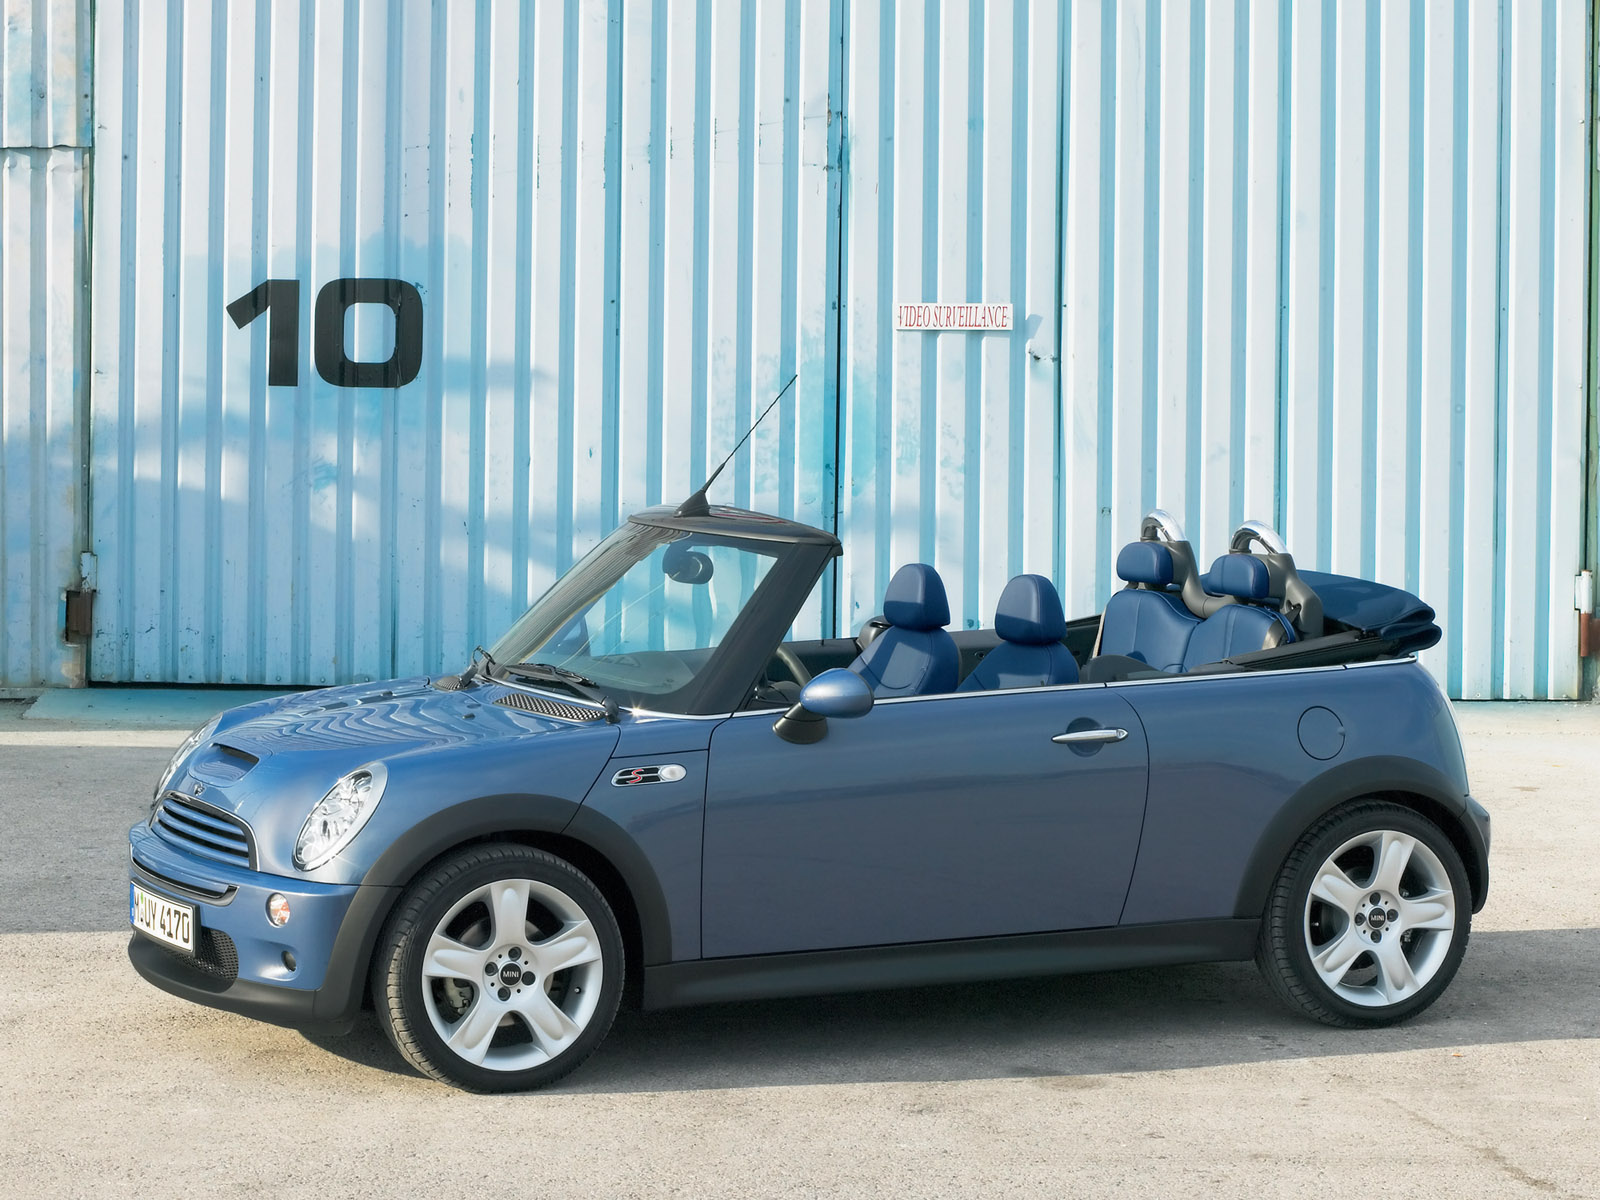 Mini Cooper S Convertible Photo Gallery: Photo #06 out of 10 ...